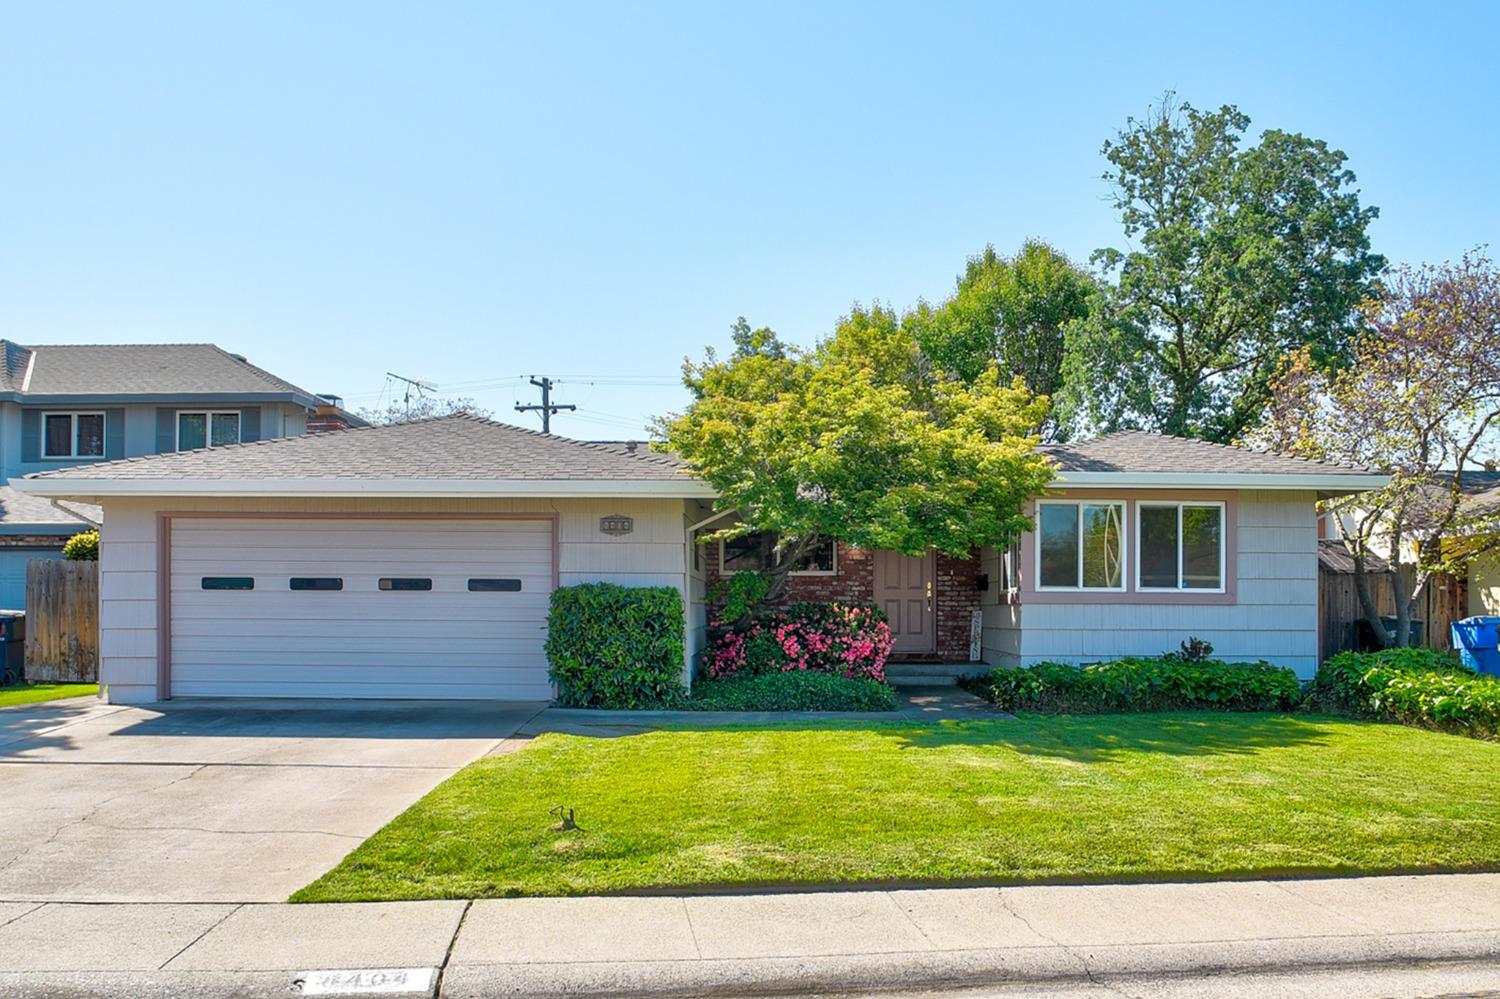 Photo of 8404 Grinnell Wy in Sacramento, CA